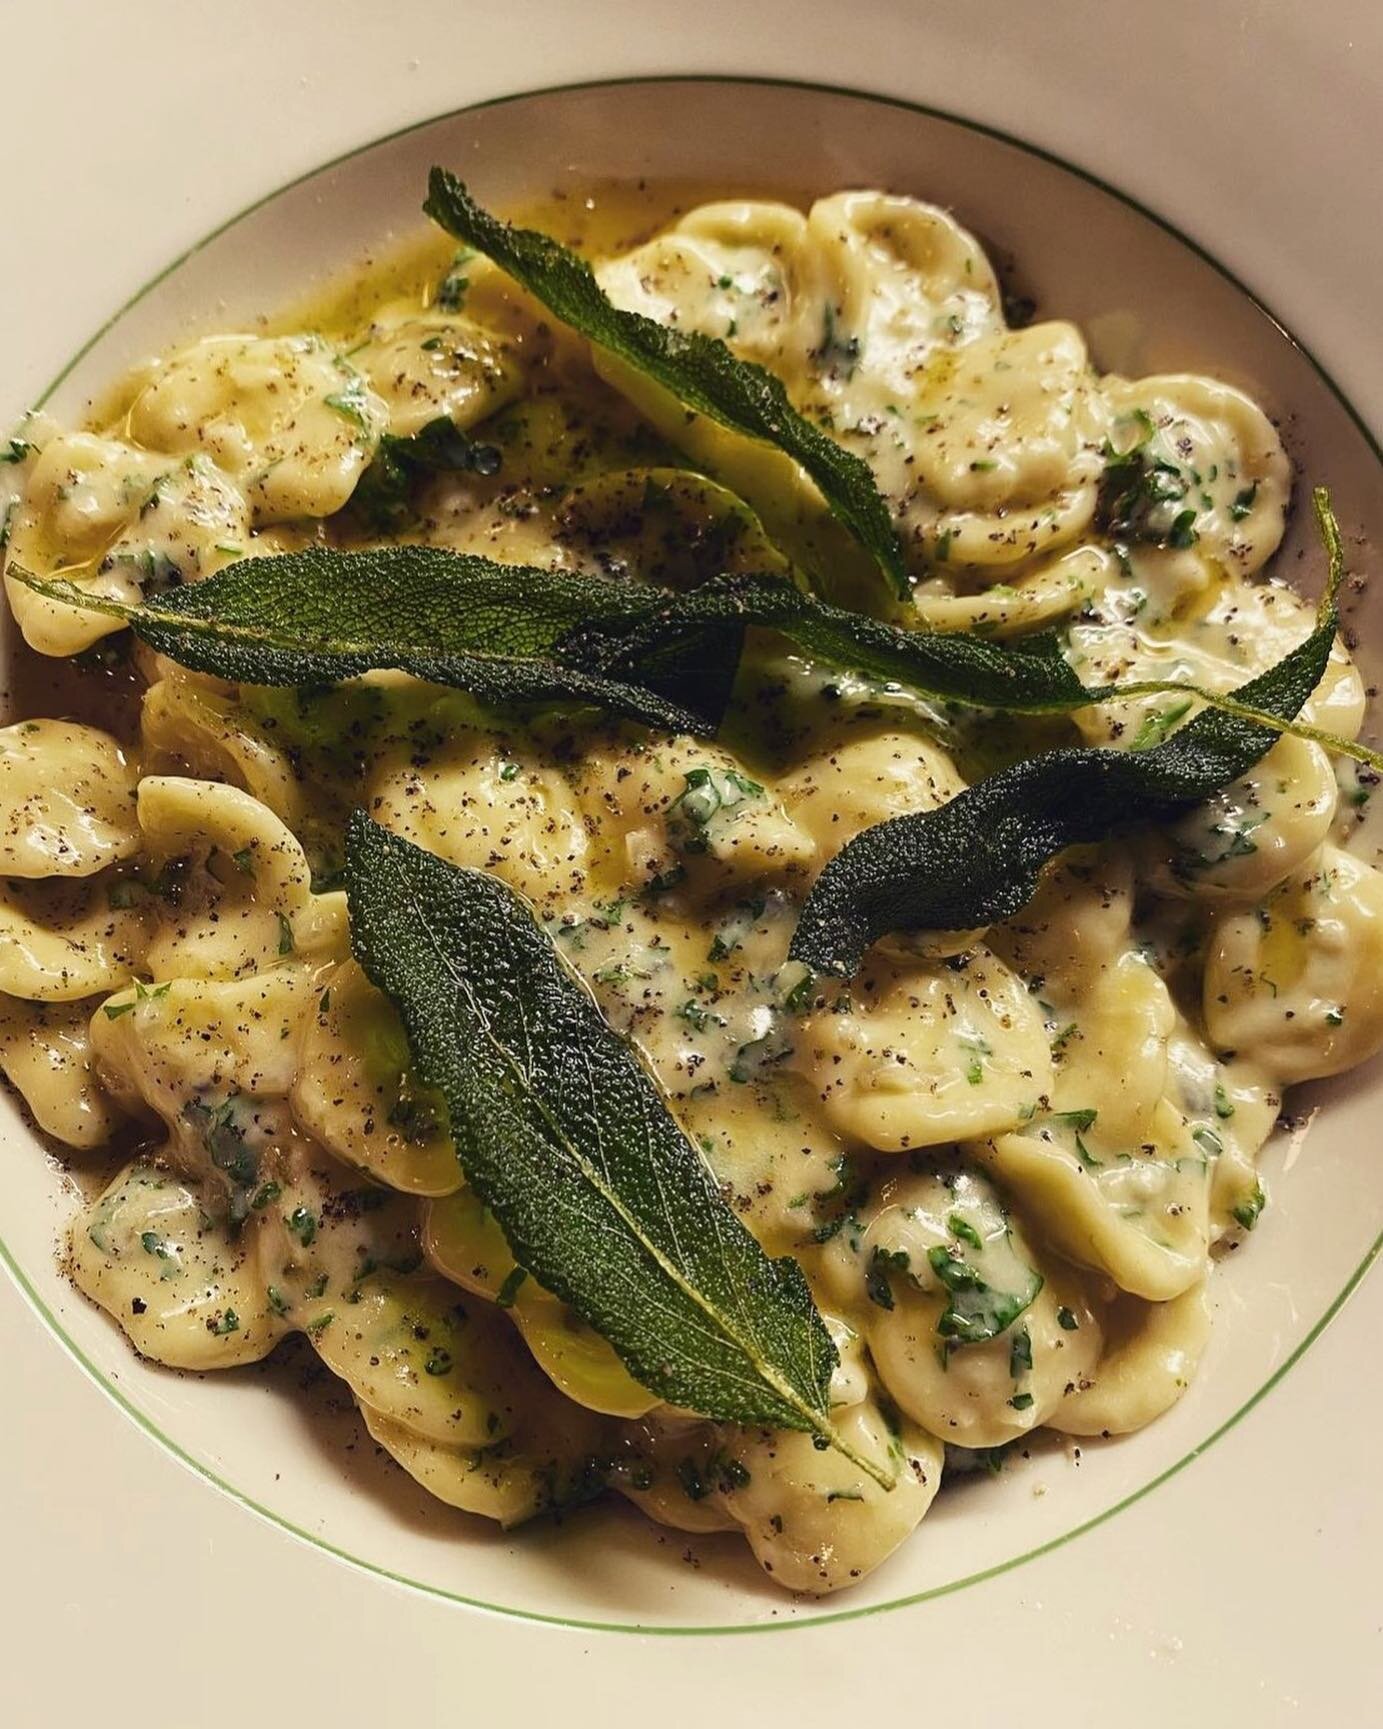 Orecchiette pasta with asparagus, Parmesan cheese, sage &amp; browned butter!!
Can be found at @chez_rinos

📸 @chez_rinos